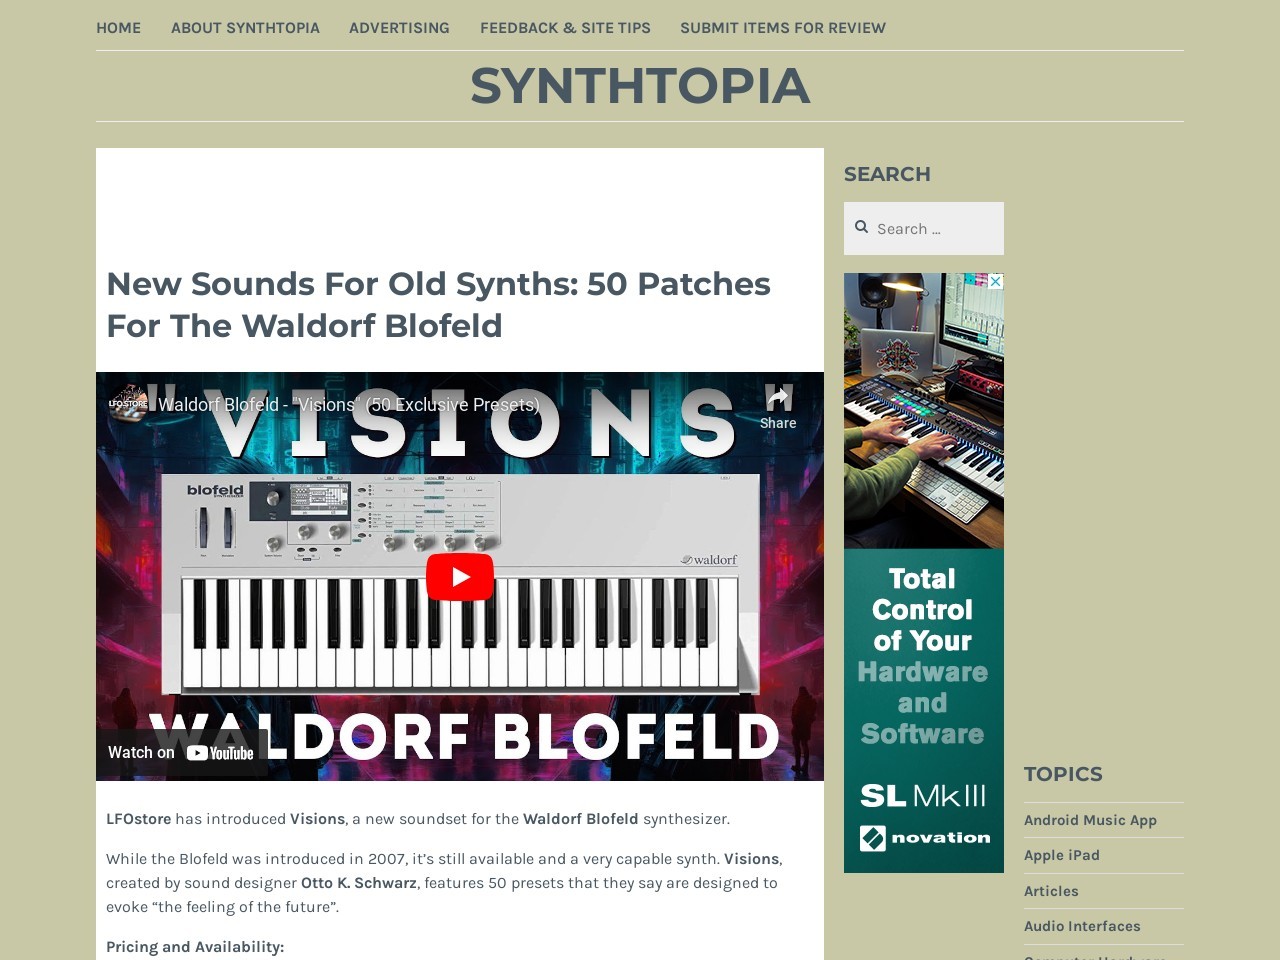 New Sounds For Old Synths: 50 Patches For The Waldorf Blofeld – Synthtopia